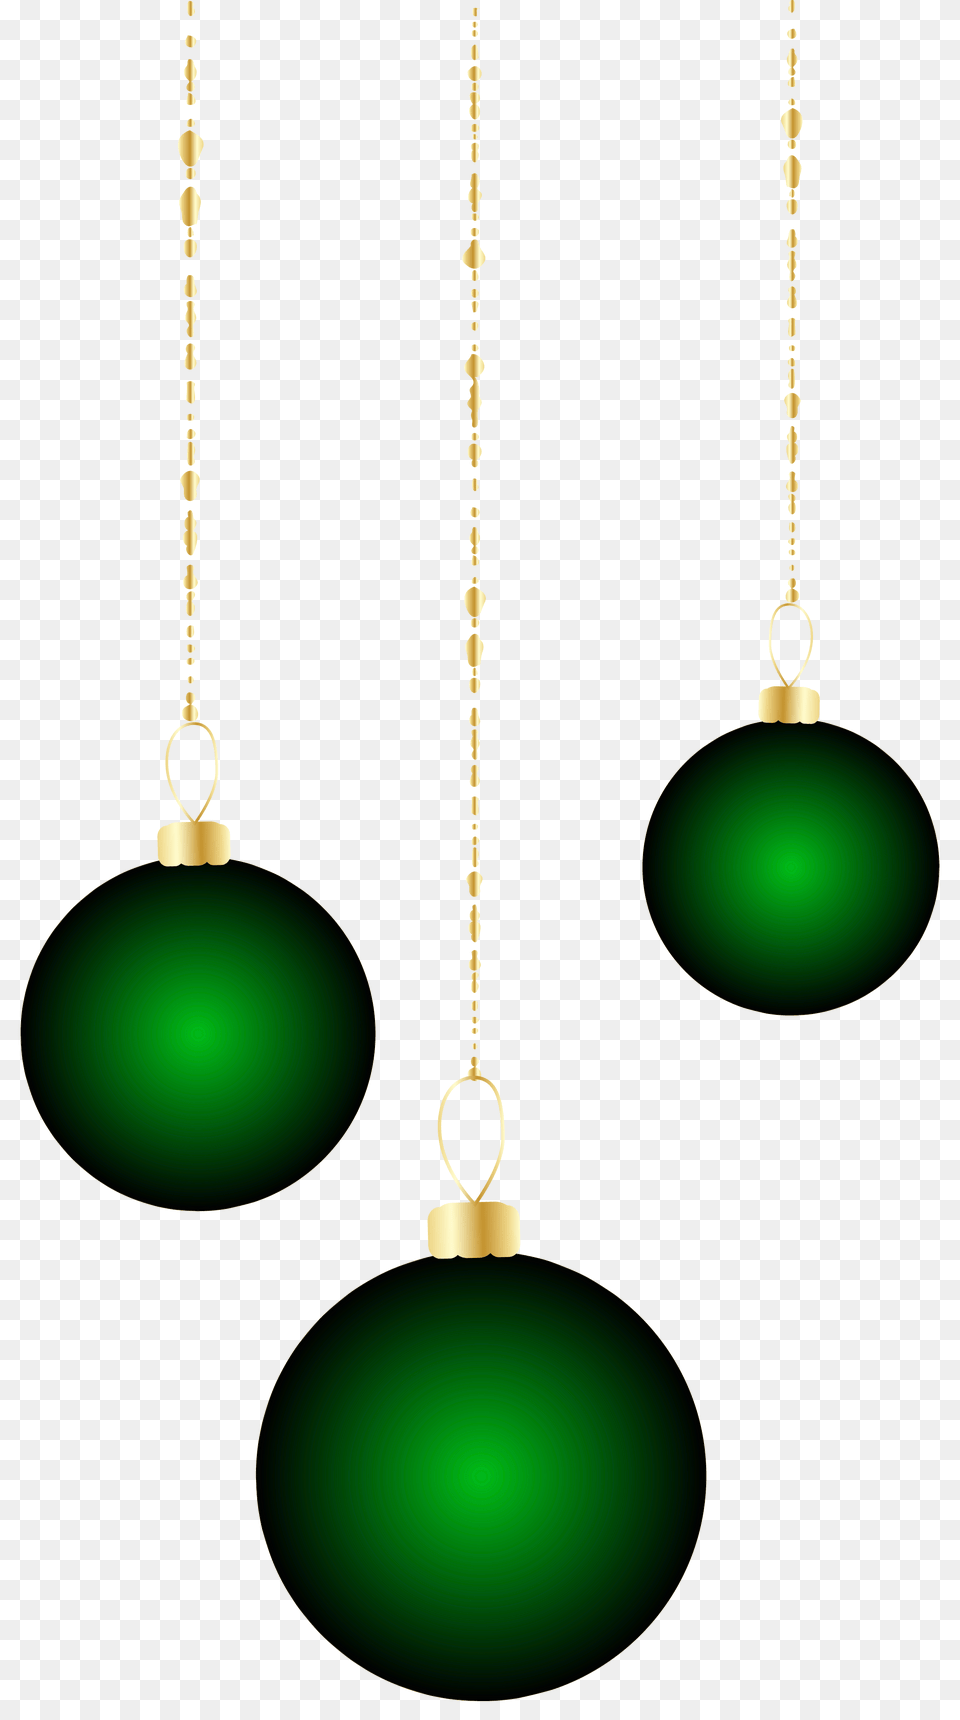 Ornaments Xmas Ornament Christmas Cards, Accessories, Earring, Jewelry, Gemstone Png